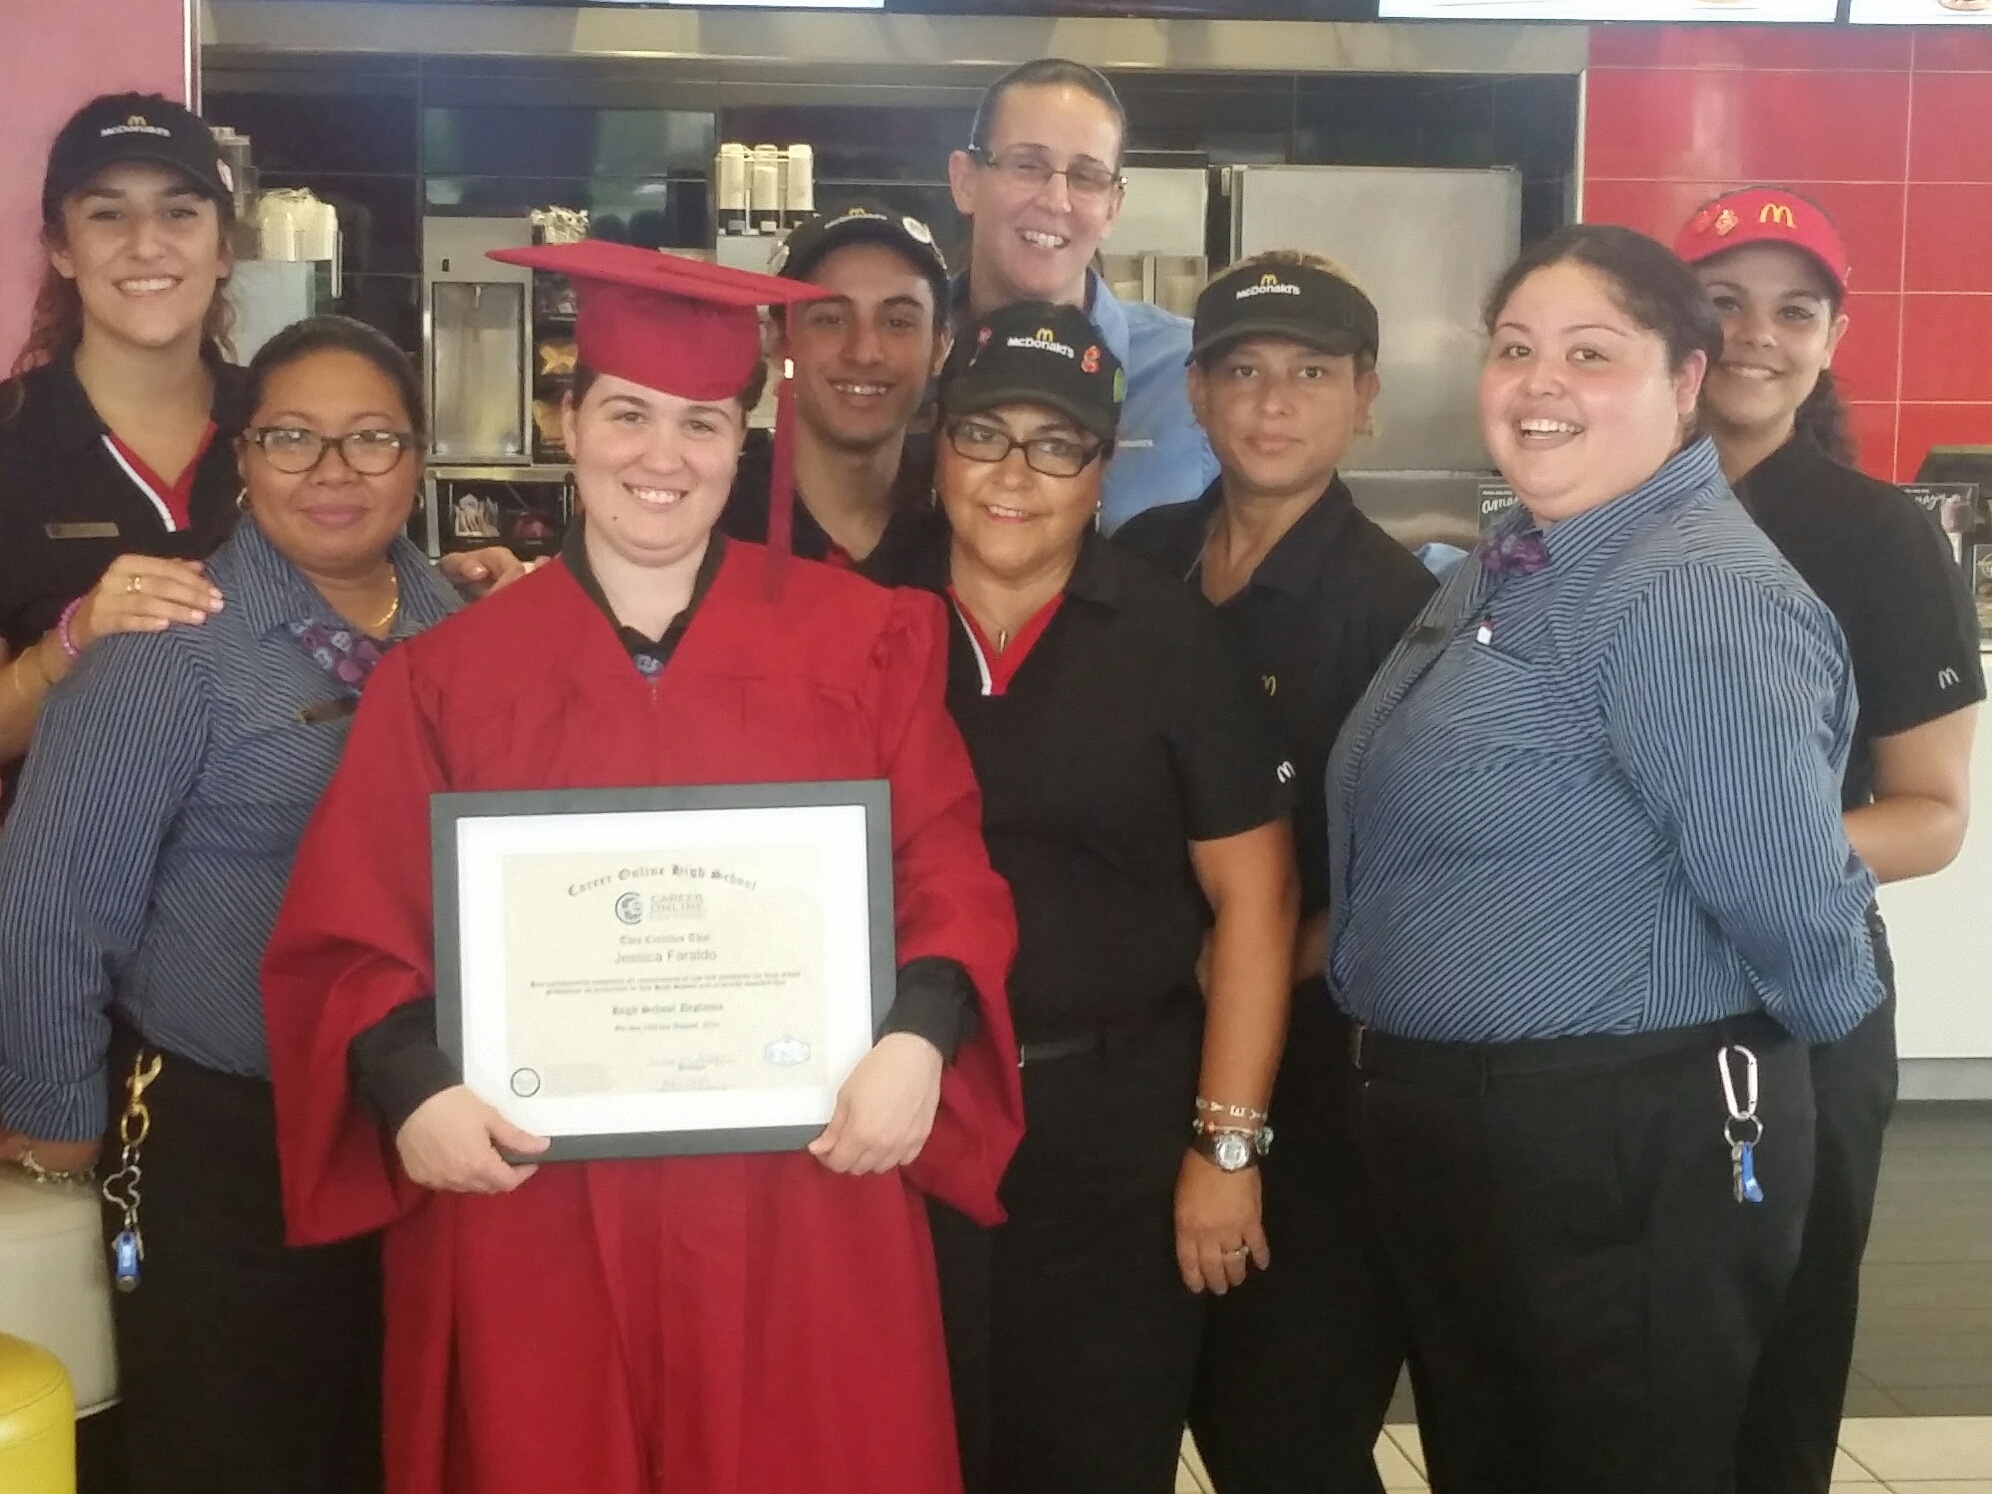 McDonald’s employee Jessica Faraldo received a surprised visit from her operations manager and supervisor, who congratulated her for earning her high-school diploma through the company’s online program.